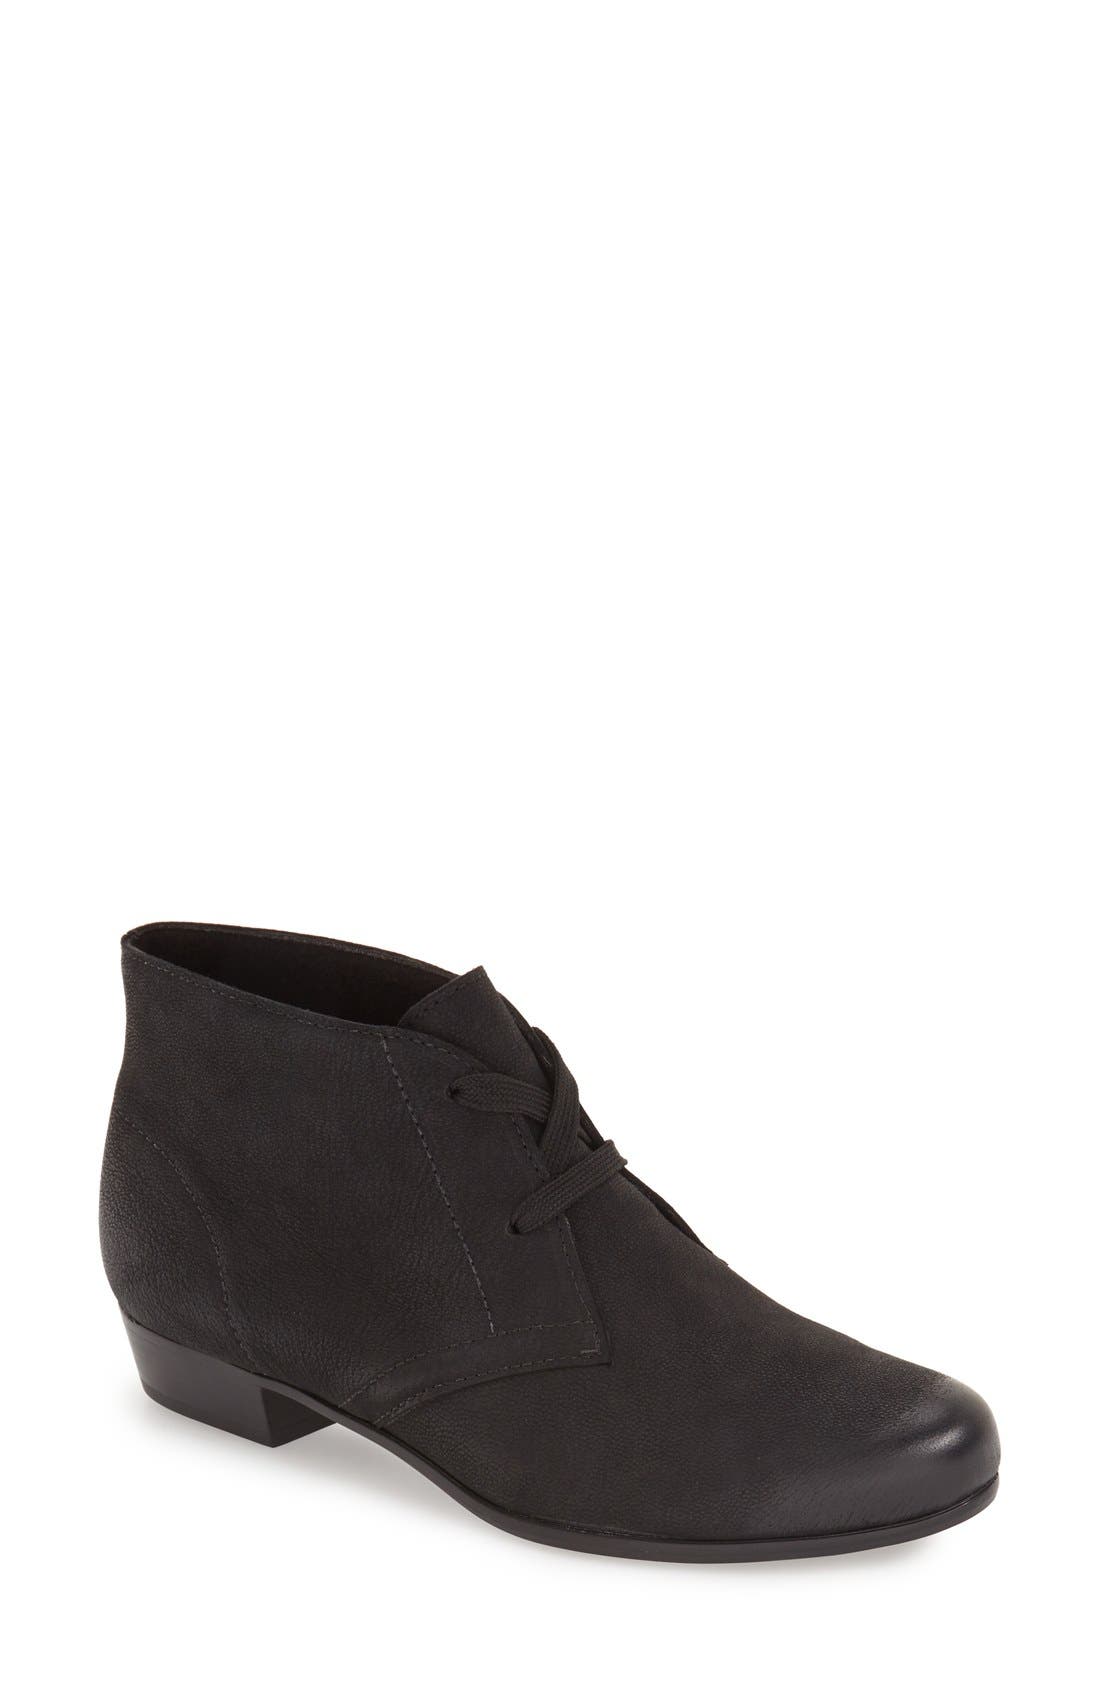 Munro | Sloane Lace-Up Bootie 